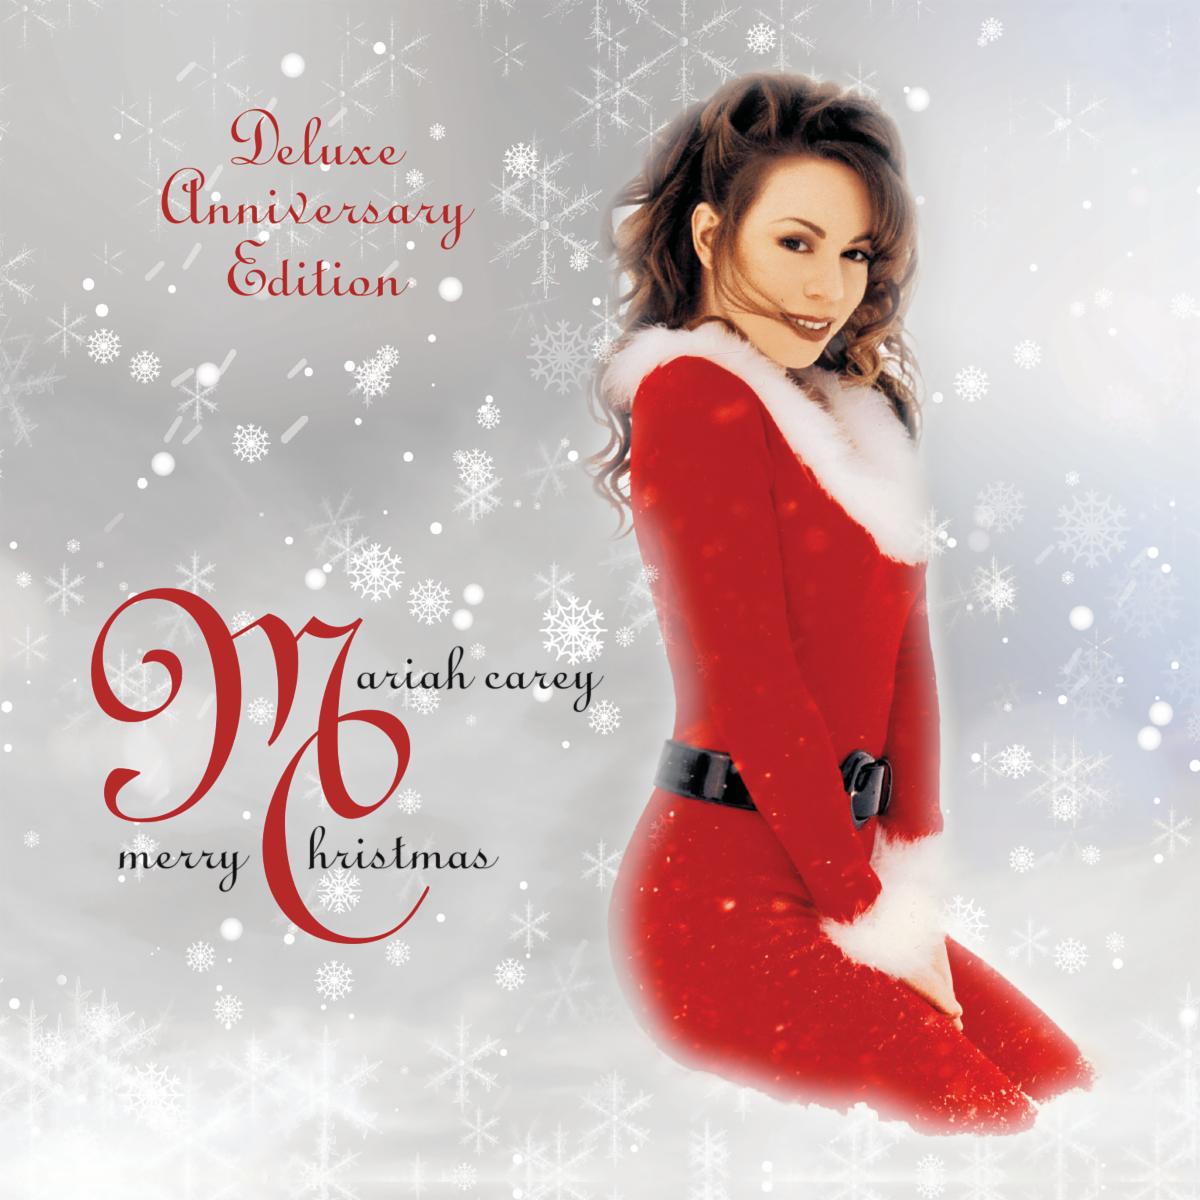 Mariah Carey's "All I Want for Christmas is You" Hits #1 on the Billboard Hot 100 Charts